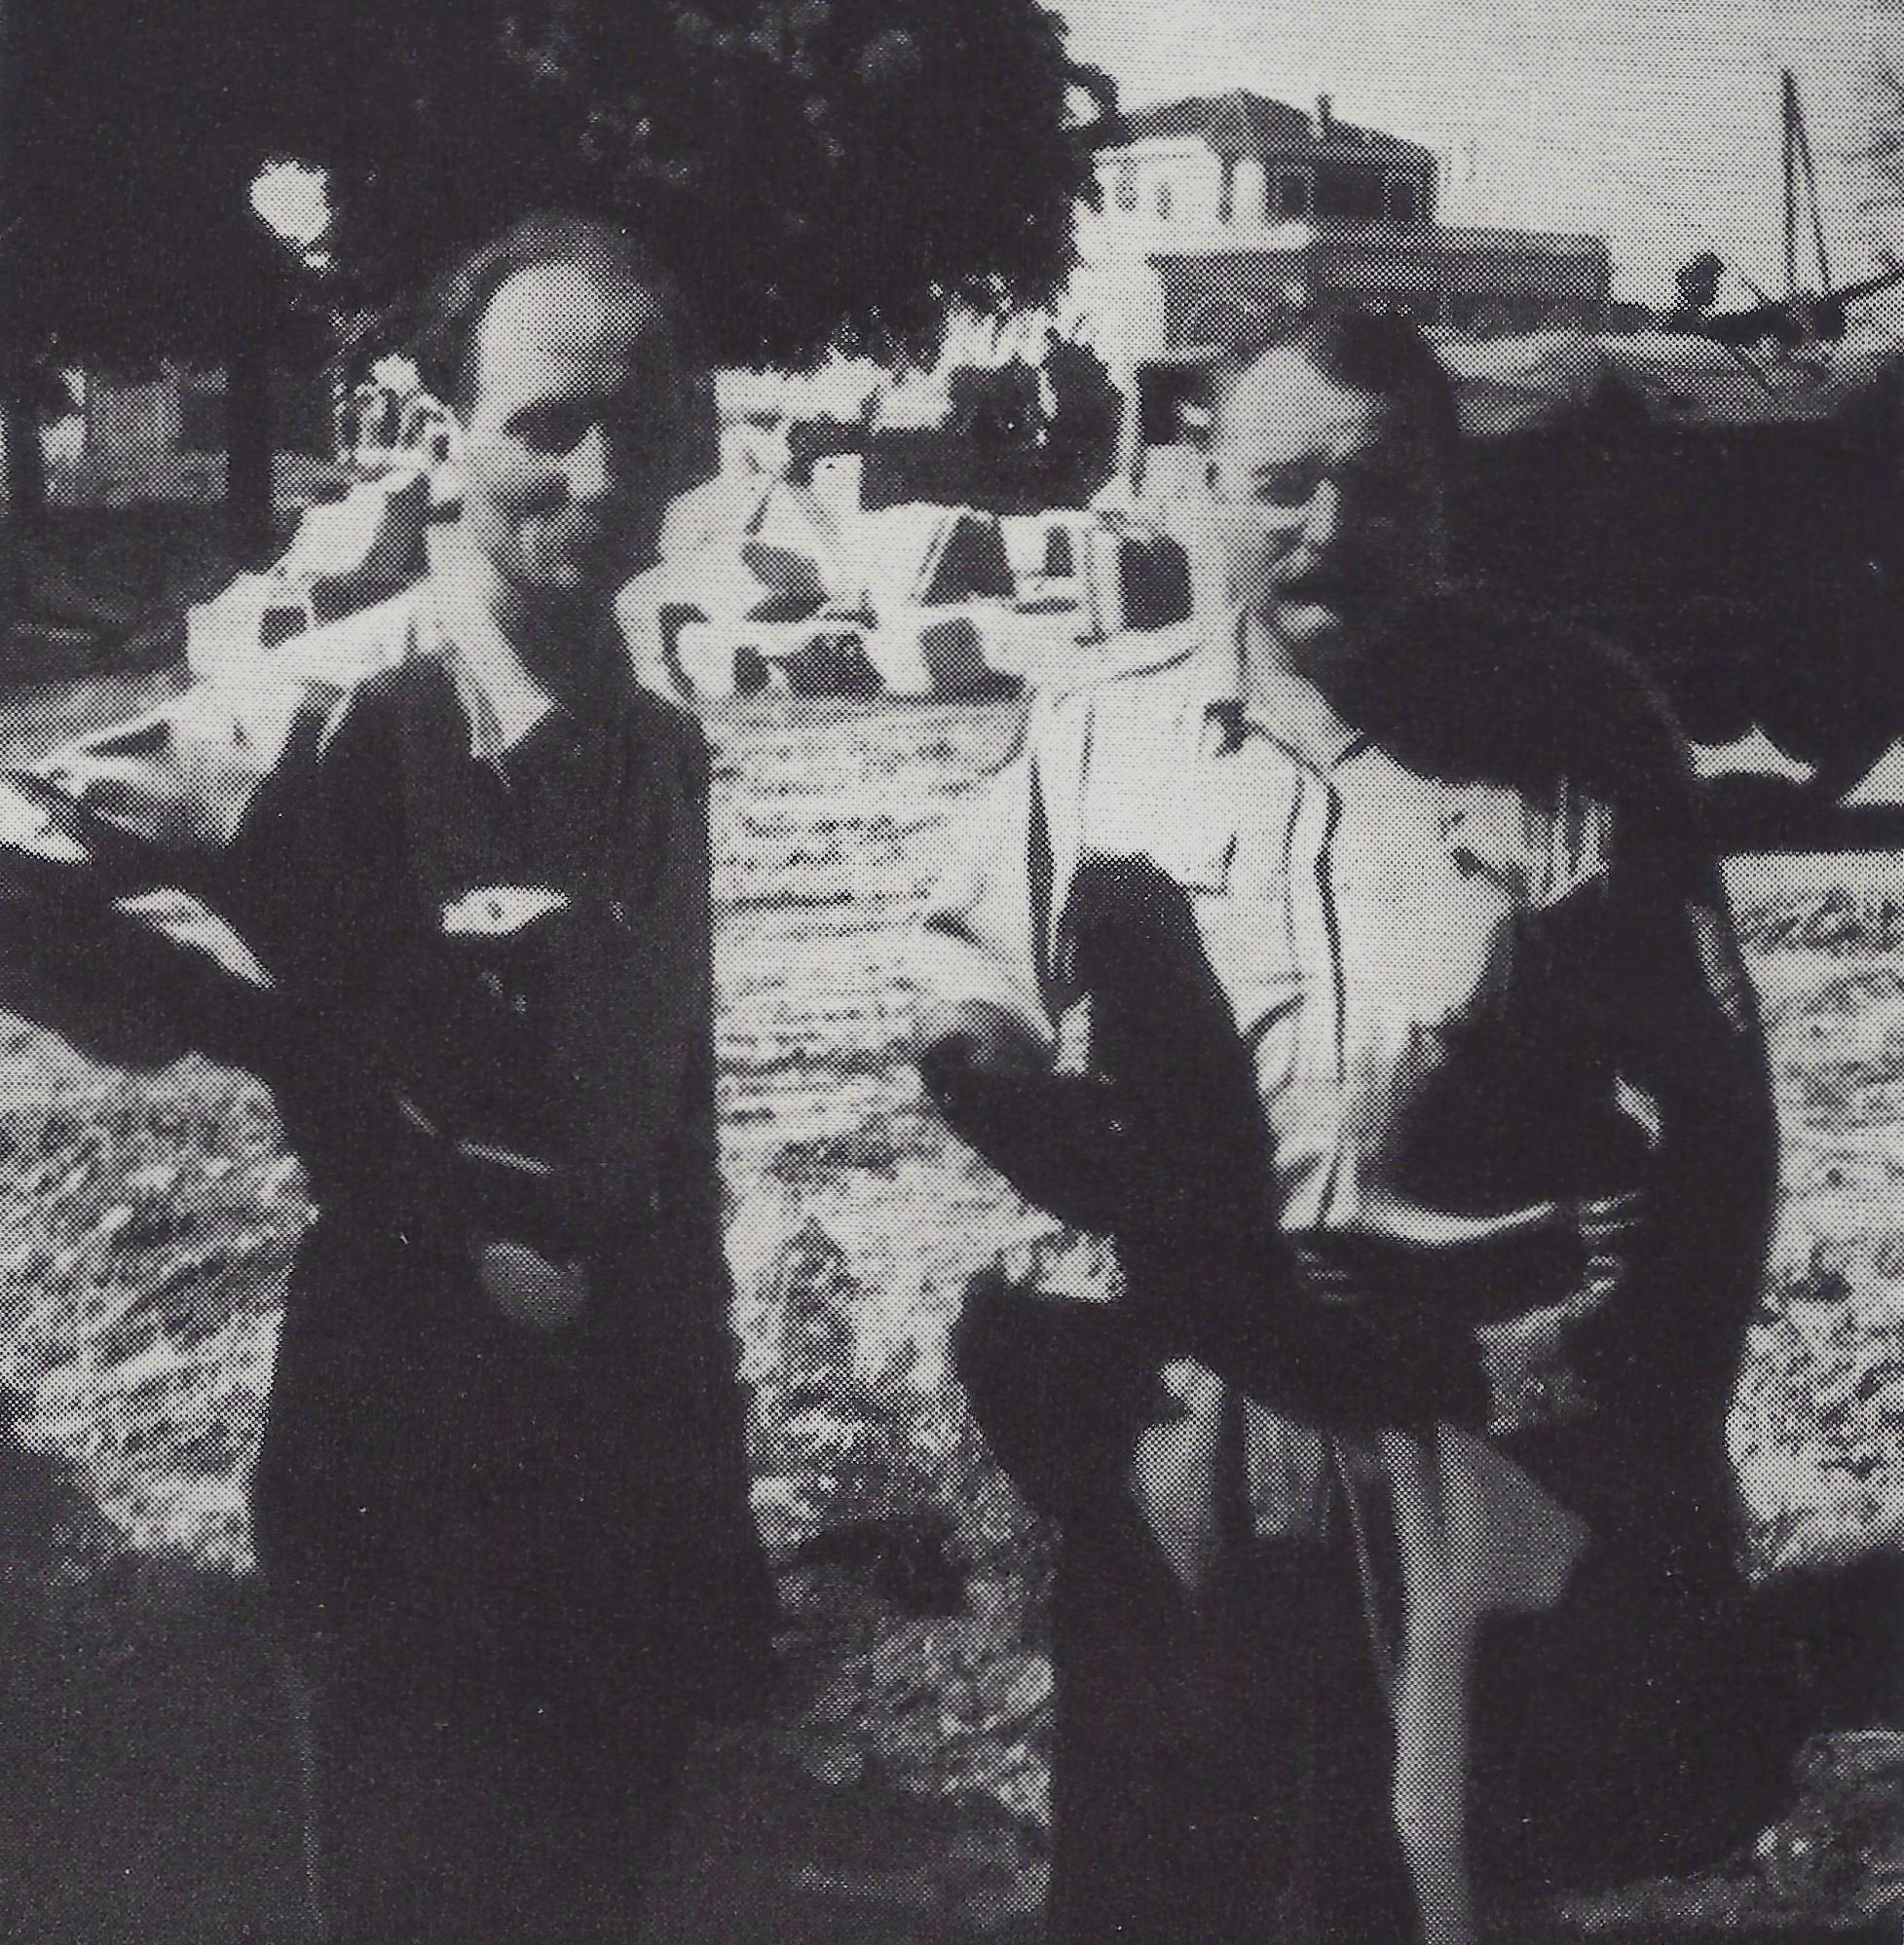 Capt. Westover took this photo of Hemingway (right) and Mouton, the French resistance leader, just before the fighting ended. Collection of the author.